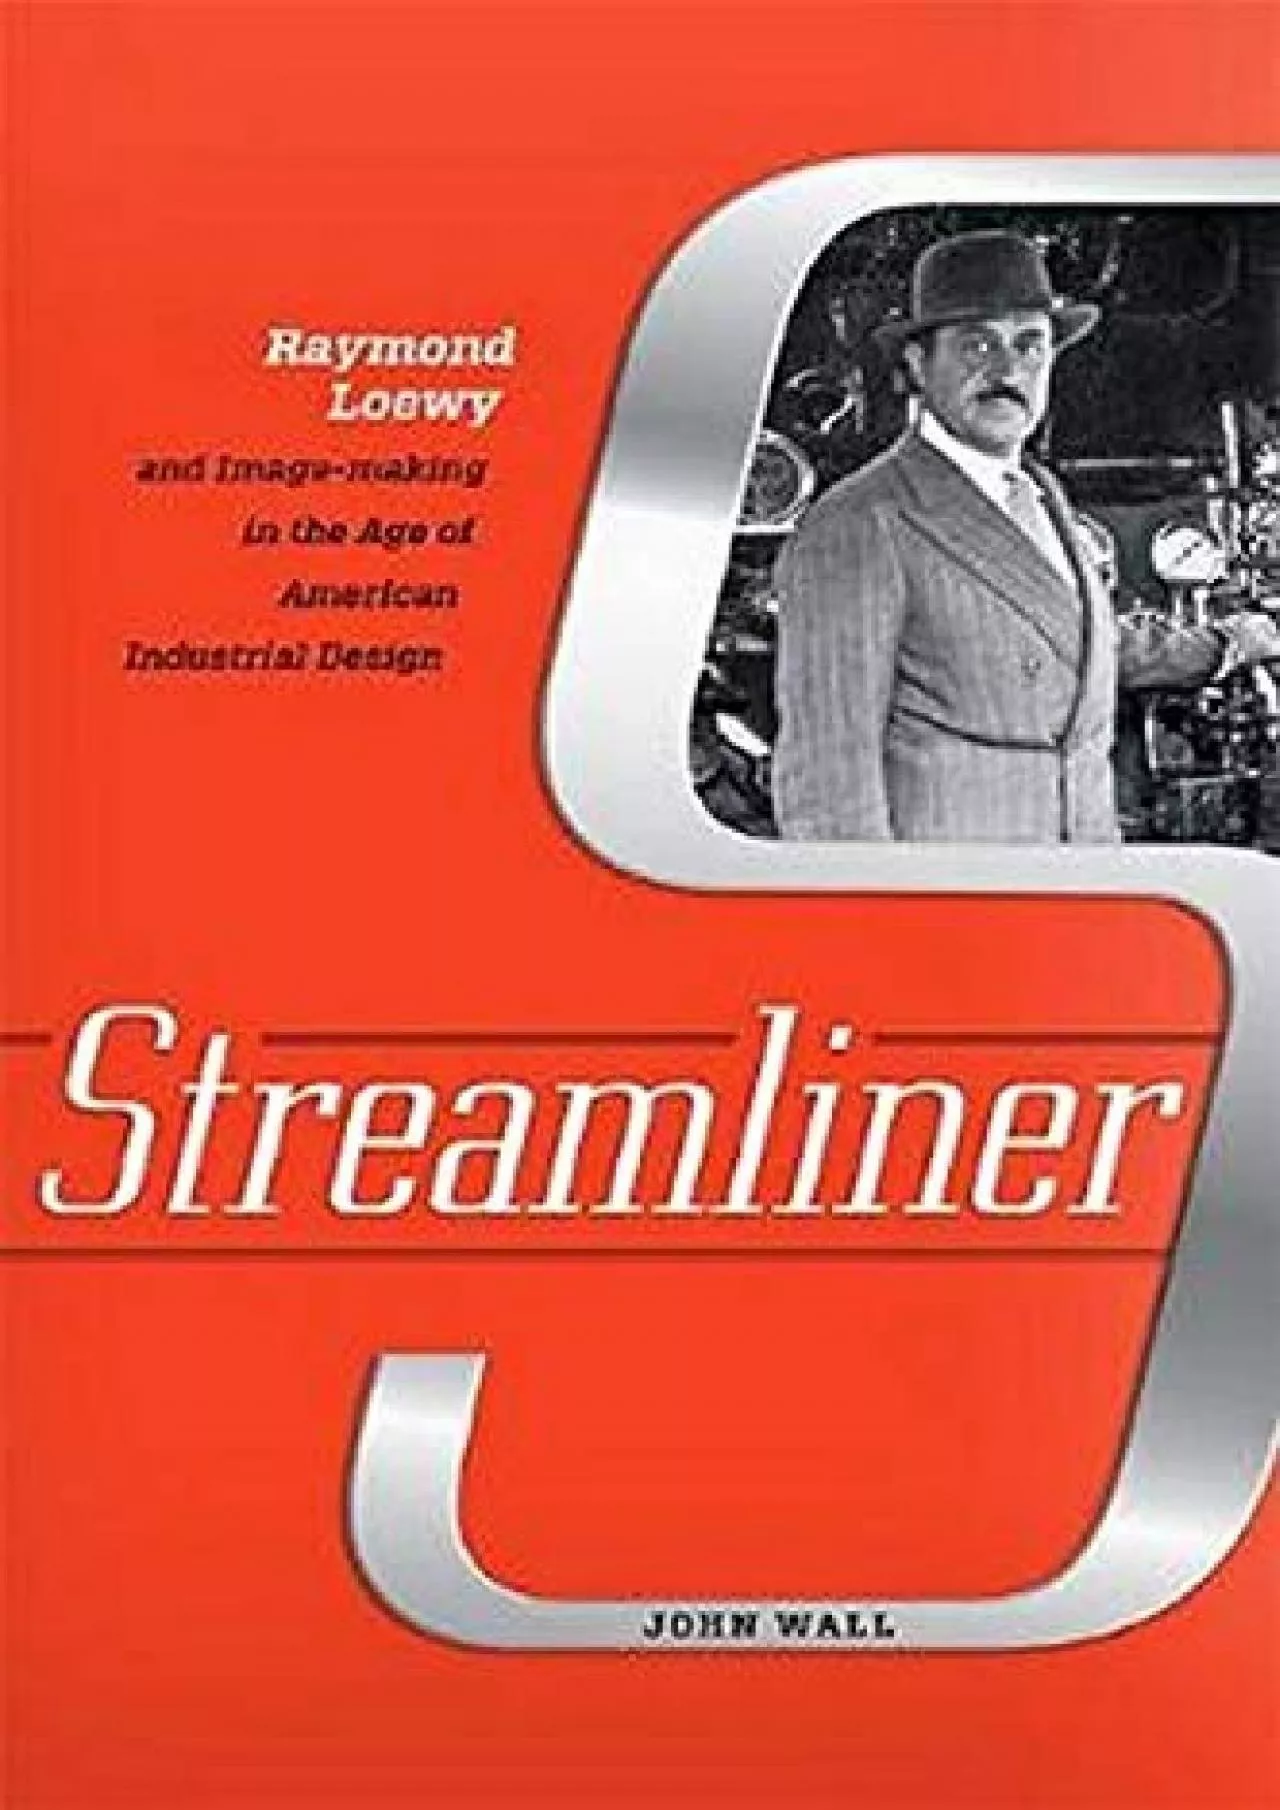 [EBOOK]-Streamliner: Raymond Loewy and Image-making in the Age of American Industrial